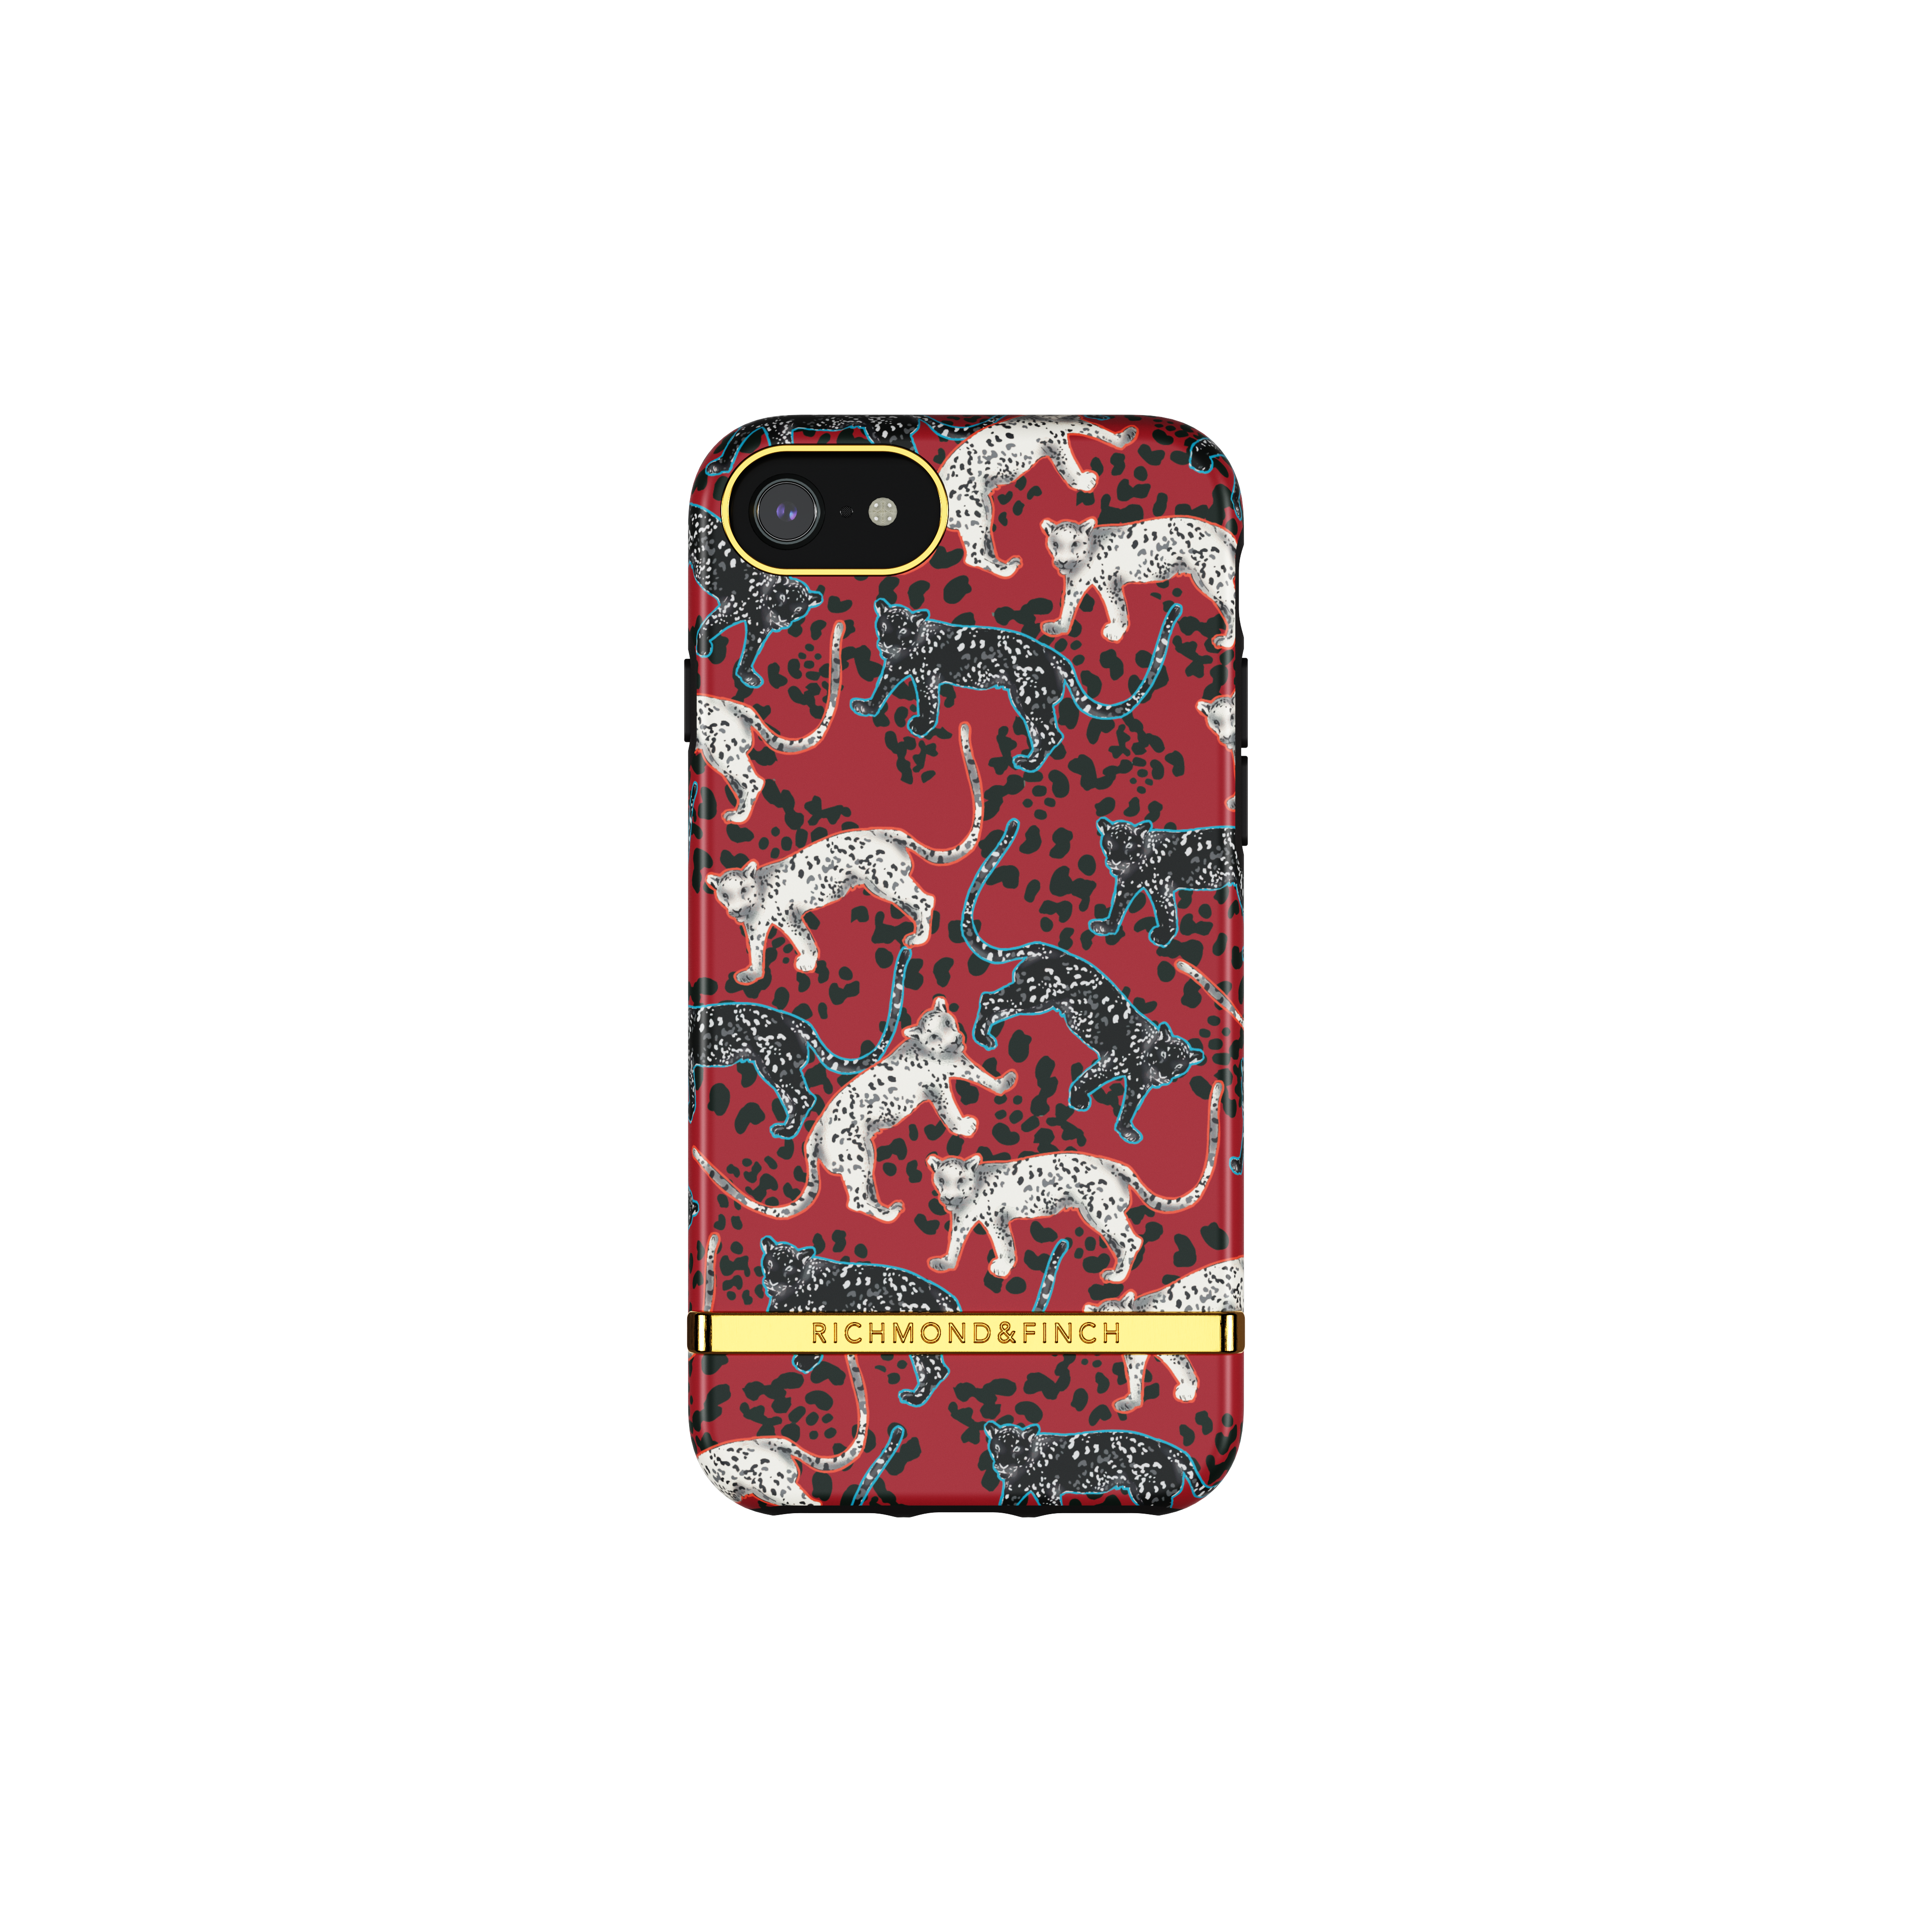 RICHMOND & RED Backcover, IPHONE Leopard 6/6S/7/8/SE20/SE22, Red APPLE, 6/7/8/SE, iPhone Samba FINCH